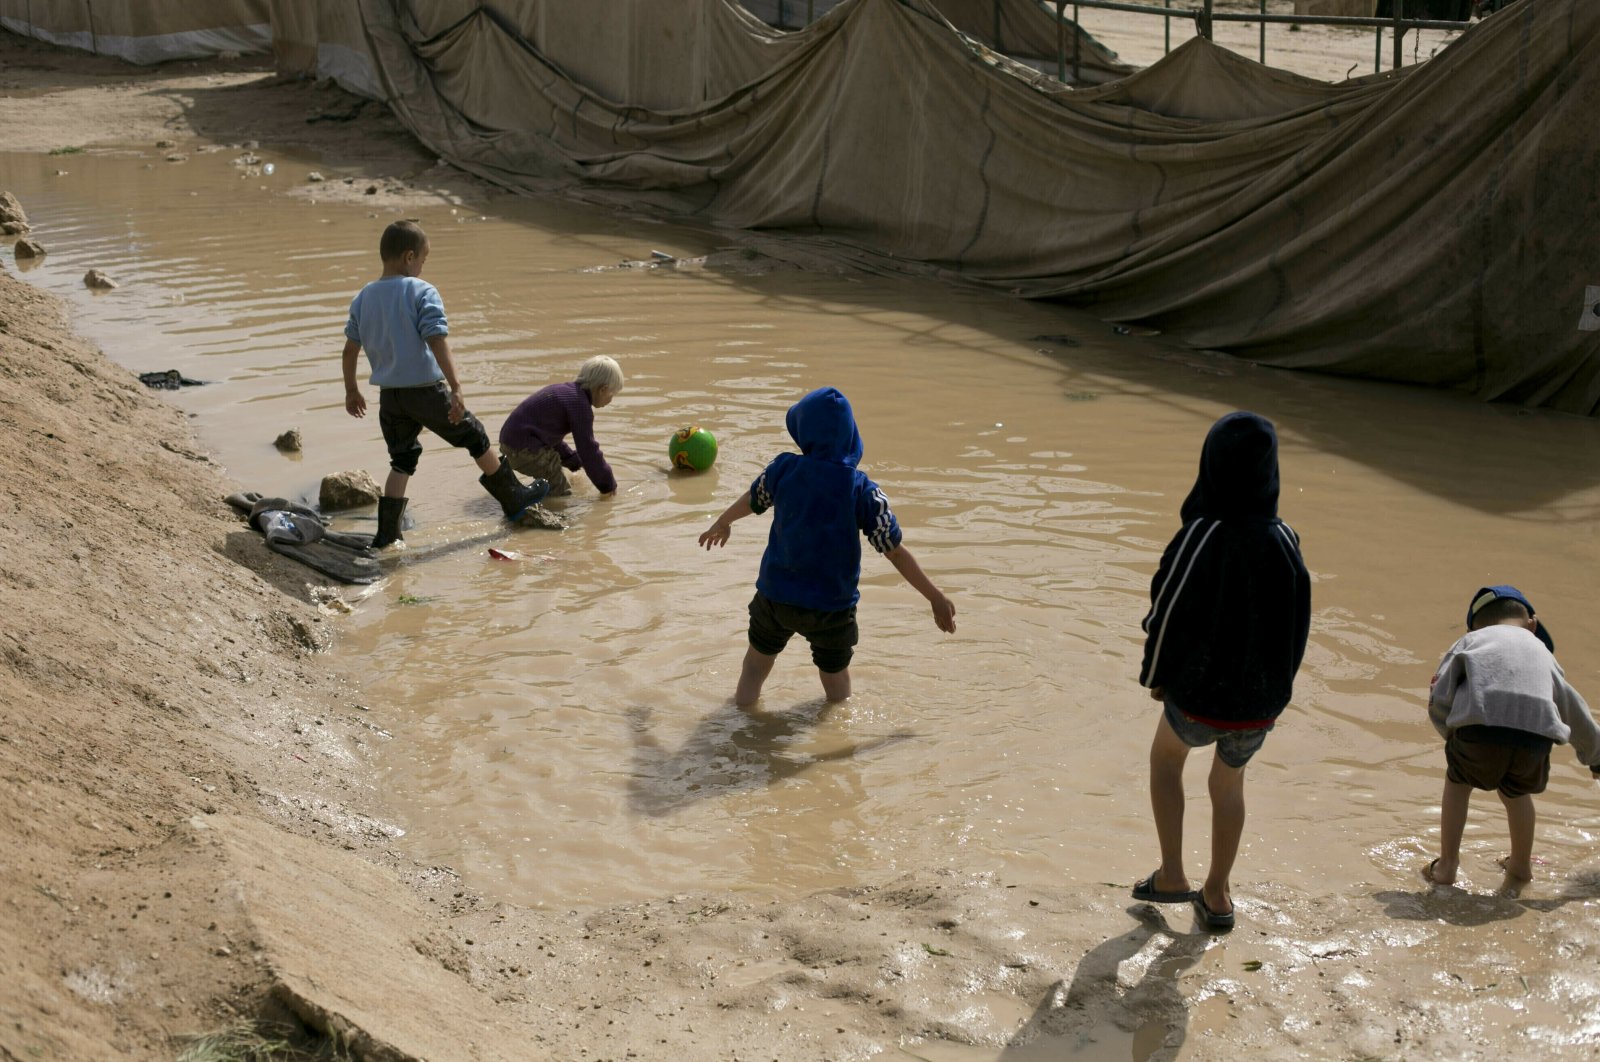  In this March 31, 2019 file photo, children play in a mud puddle in the section for foreign families at Al-Hol camp in Hasakeh province, Syria. (AP File Photo)